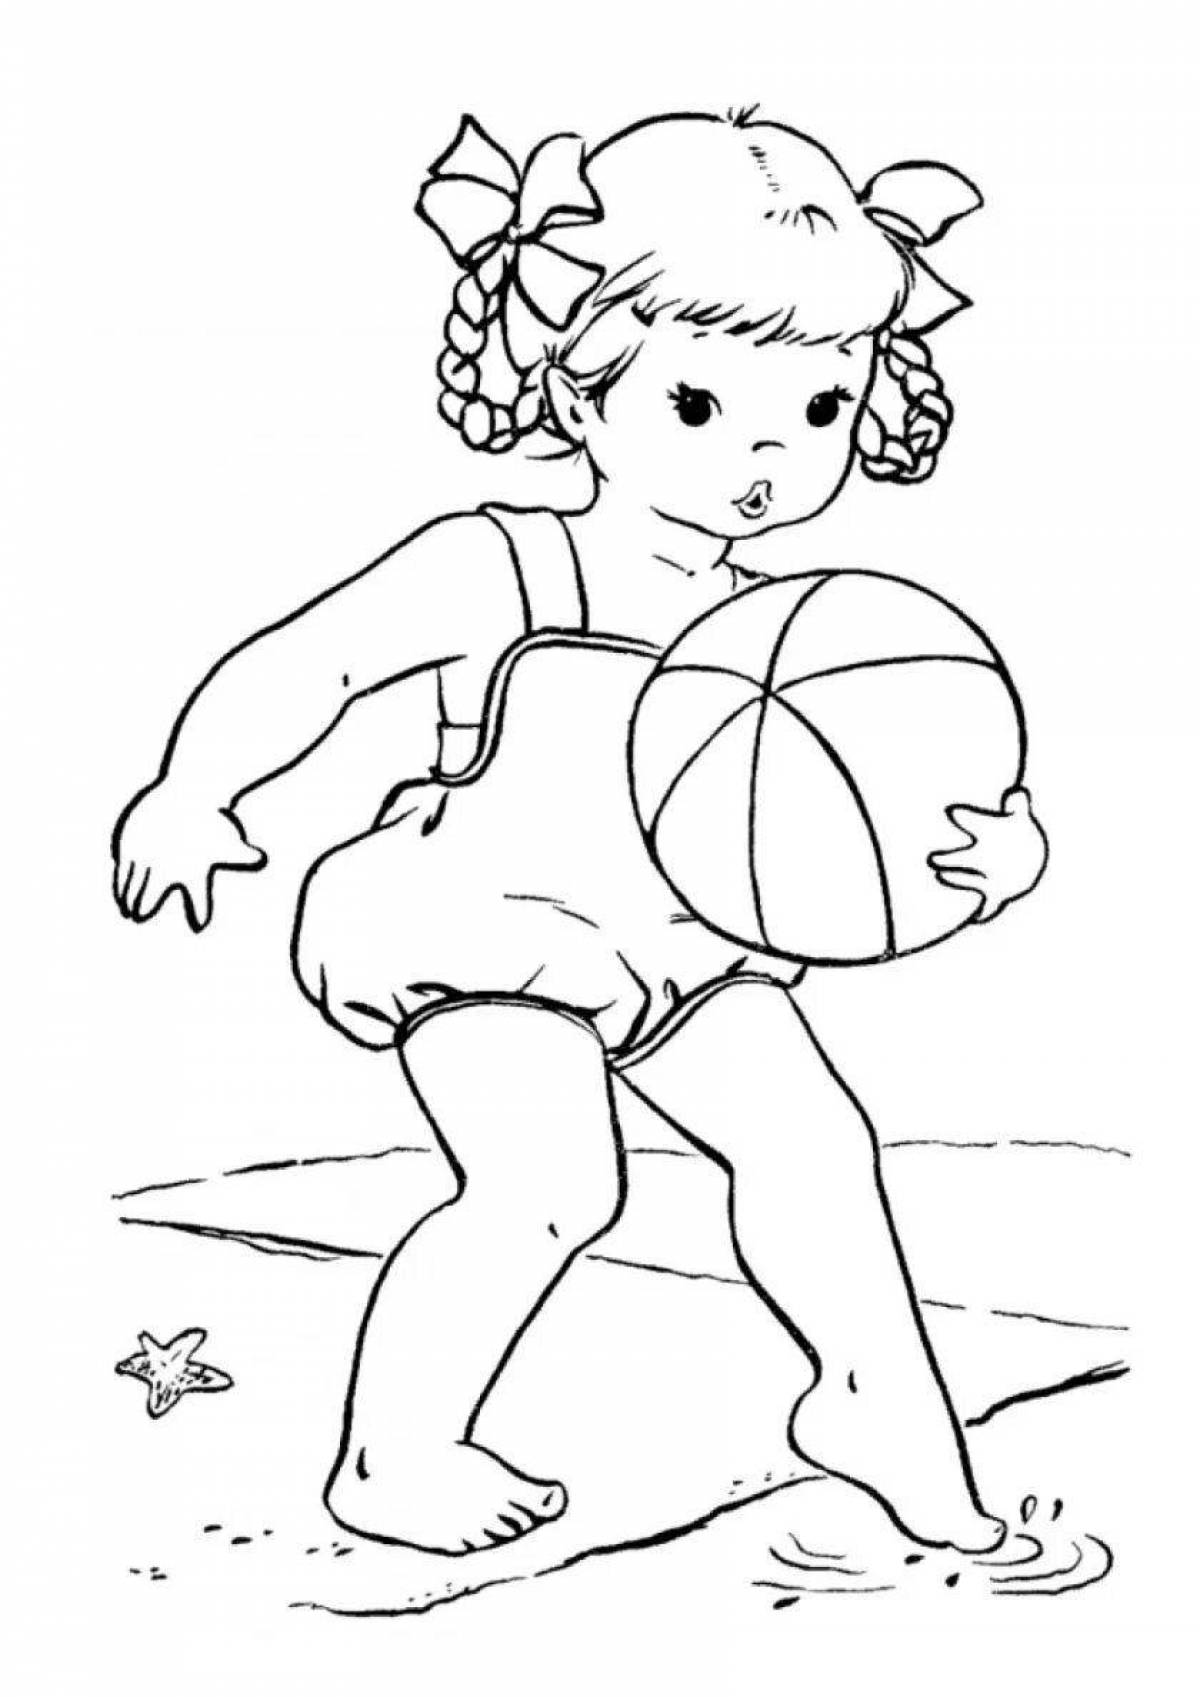 Blissful summer coloring page